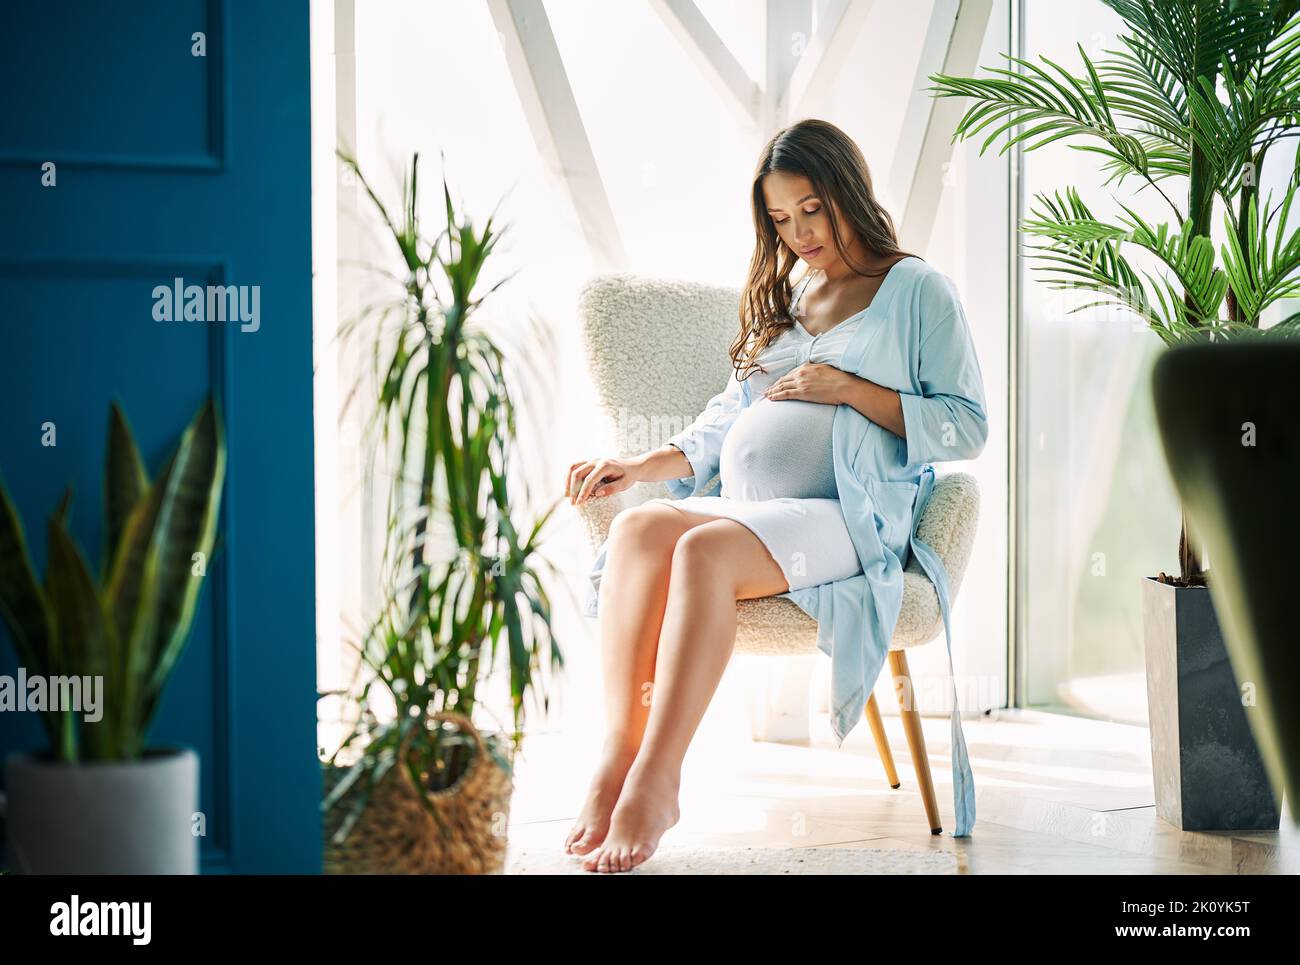 Pregnant happy woman touching her belly rest on chair at modern home. Tender mood photo of healthy pregnancy. Stock Photo